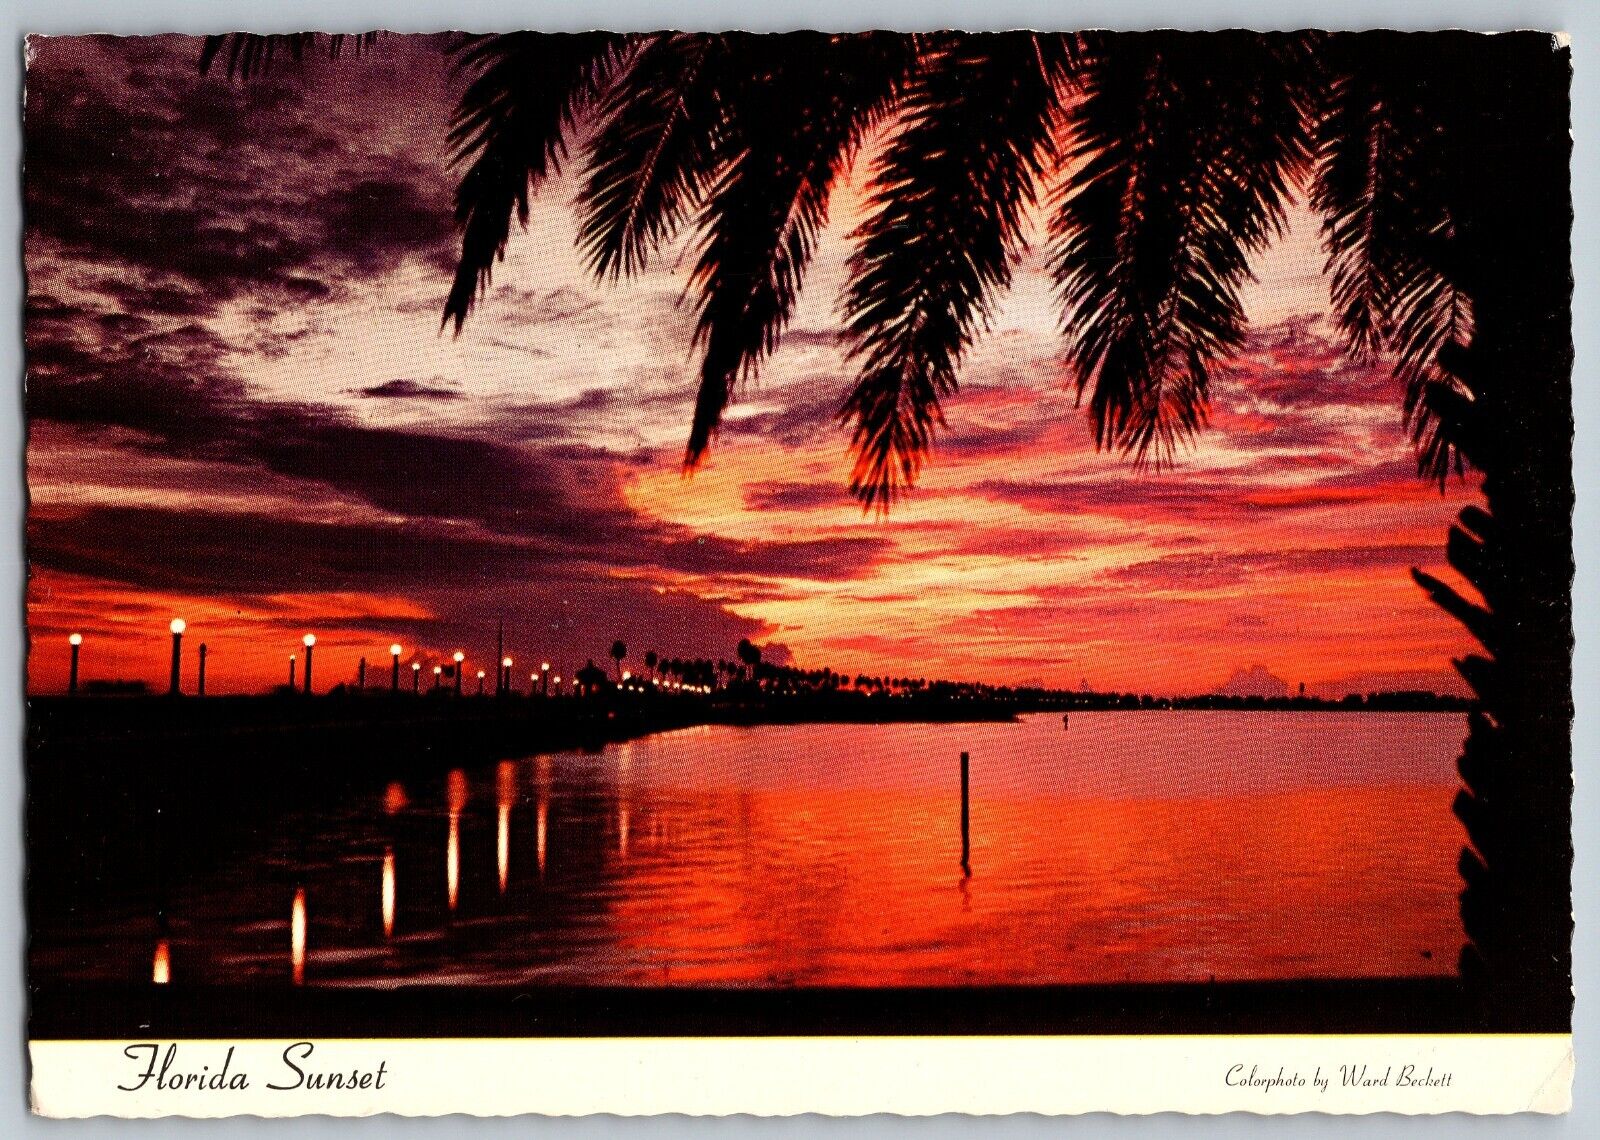 Florida FL - Beautiful Sunsets and silhouettes - Vintage Postcard 4x6 - Posted